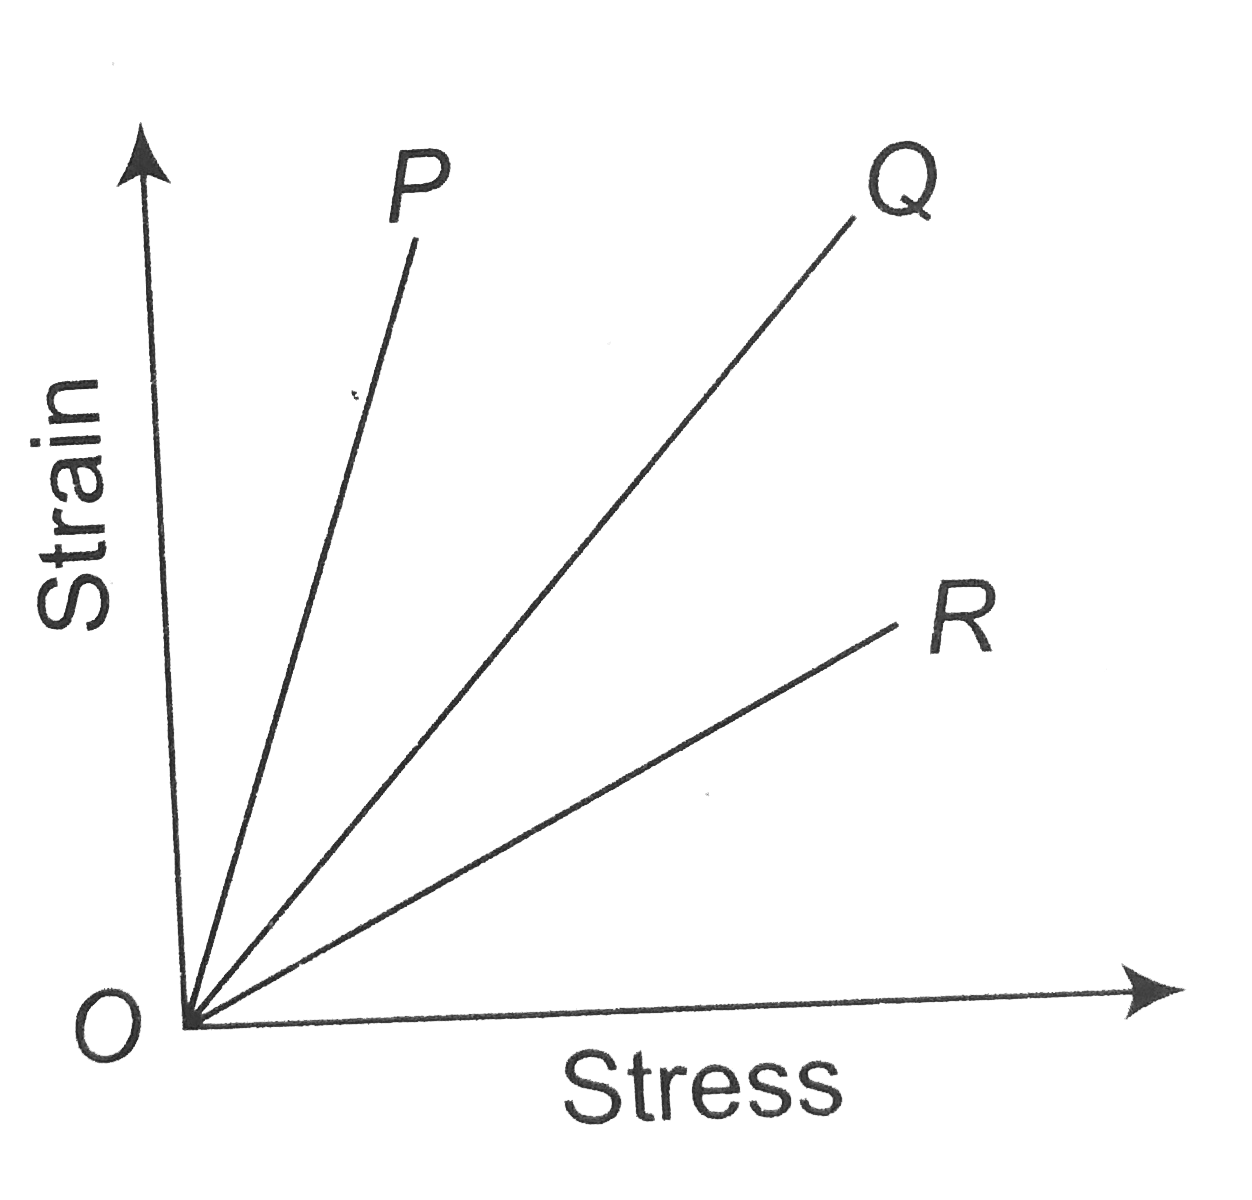 The strain stress curves of three wires of different materials are shown in the figure. P, Q and R are the elastic limits of the wires. The figure shown that